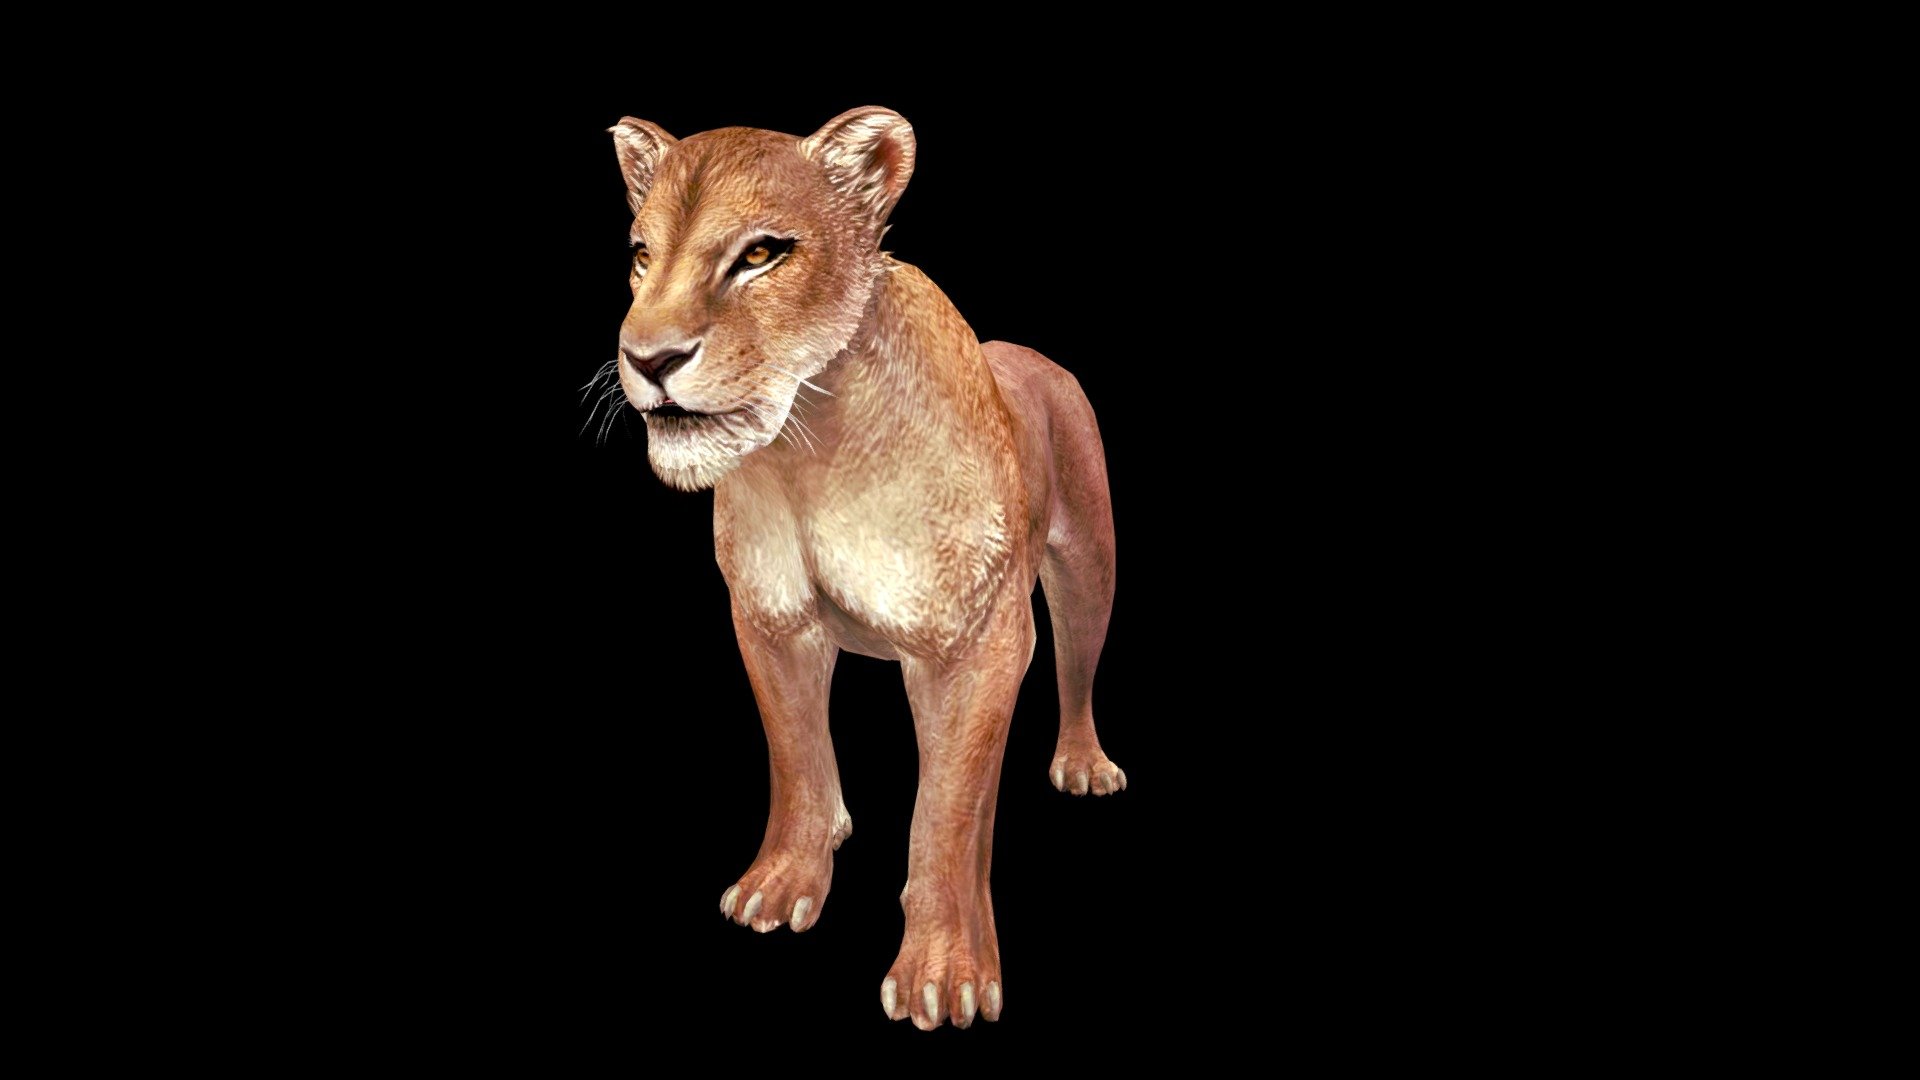 GET THIS LIONESS 3D model offer a lot of ease of handling animation and professionalism
for your projects - High detail and realistic LIONESS 3D model   JUNGLE ANIMALS RDAM ,
This is a 3D ANIMAL high-end photorealistic 3D models of ANIMALS JUNGLE called LIONESS 3D model  Animated DE LA JUNGLA in Blender. SAVED AS 3DS MAX, MAYA, UNREAL, UNITY, CINEMA 4D, BLENDER FILE, FBX, ANIMATED AND RIGGED
 DOWNLOAD 3D MODEL: https://sites.google.com/view/3d-models-download-rdam/models-3ds-max-maya-c4d-unity-unreal-blender
Originally created with 3ds Max 2017 and saved as BLENDER 3.0 FILE, 3ds Max FBX, MAYA, CINEMA 4D,  UNREAL, UNITY, 

SCENE objects:

With some Overlapping textures and Materials of the highest quality
The Model is Multi functional with all the Programs among these, Blender, Iclone, Unity, 3dsmax, Unreal, Maya, C4D and many more  

Please check out my other models, just click on my user name to see complete gallery RDAM STUDIO

Rig Description

BLENDER 3.0
&lsquo;Auto rig'
&lsquo;complet facial rig' - LIONESS - 3D model by Rdam 3D Pictures (@rdam) 3d model